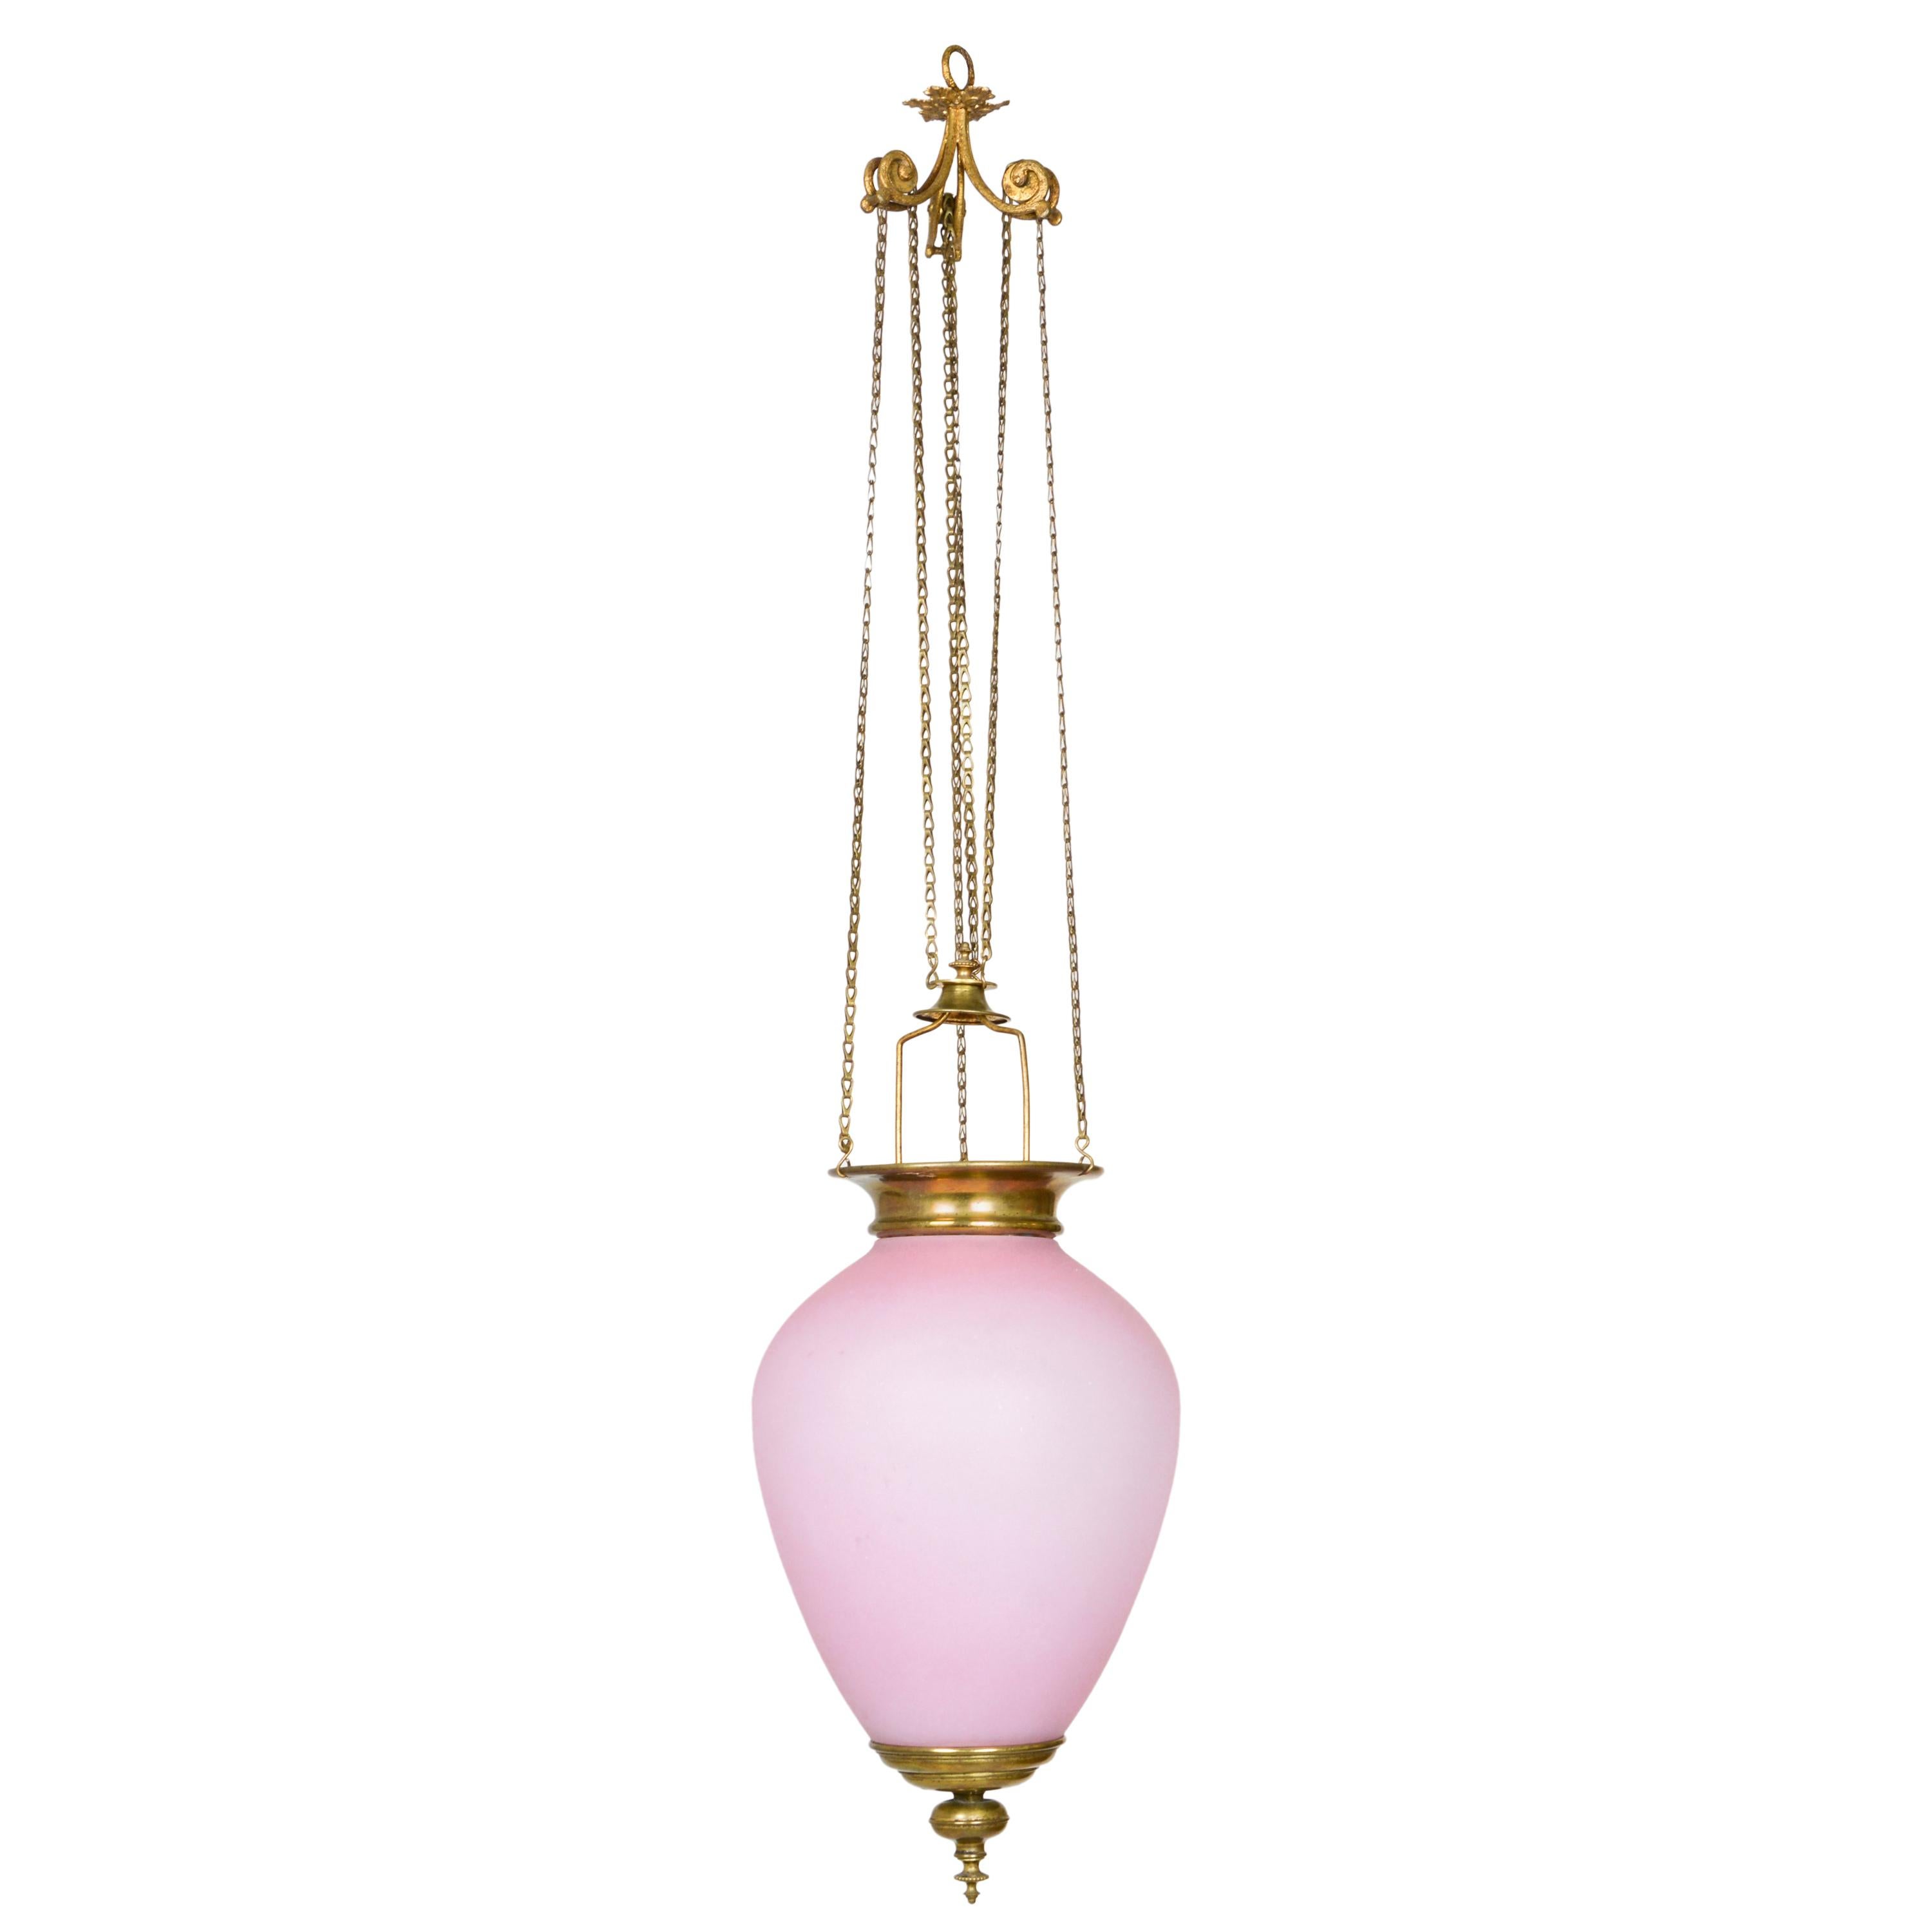 Lobmeyr-Restored Biedermeier Pale Pink Glass Pendant Lamp on Chain Pull Pulley For Sale